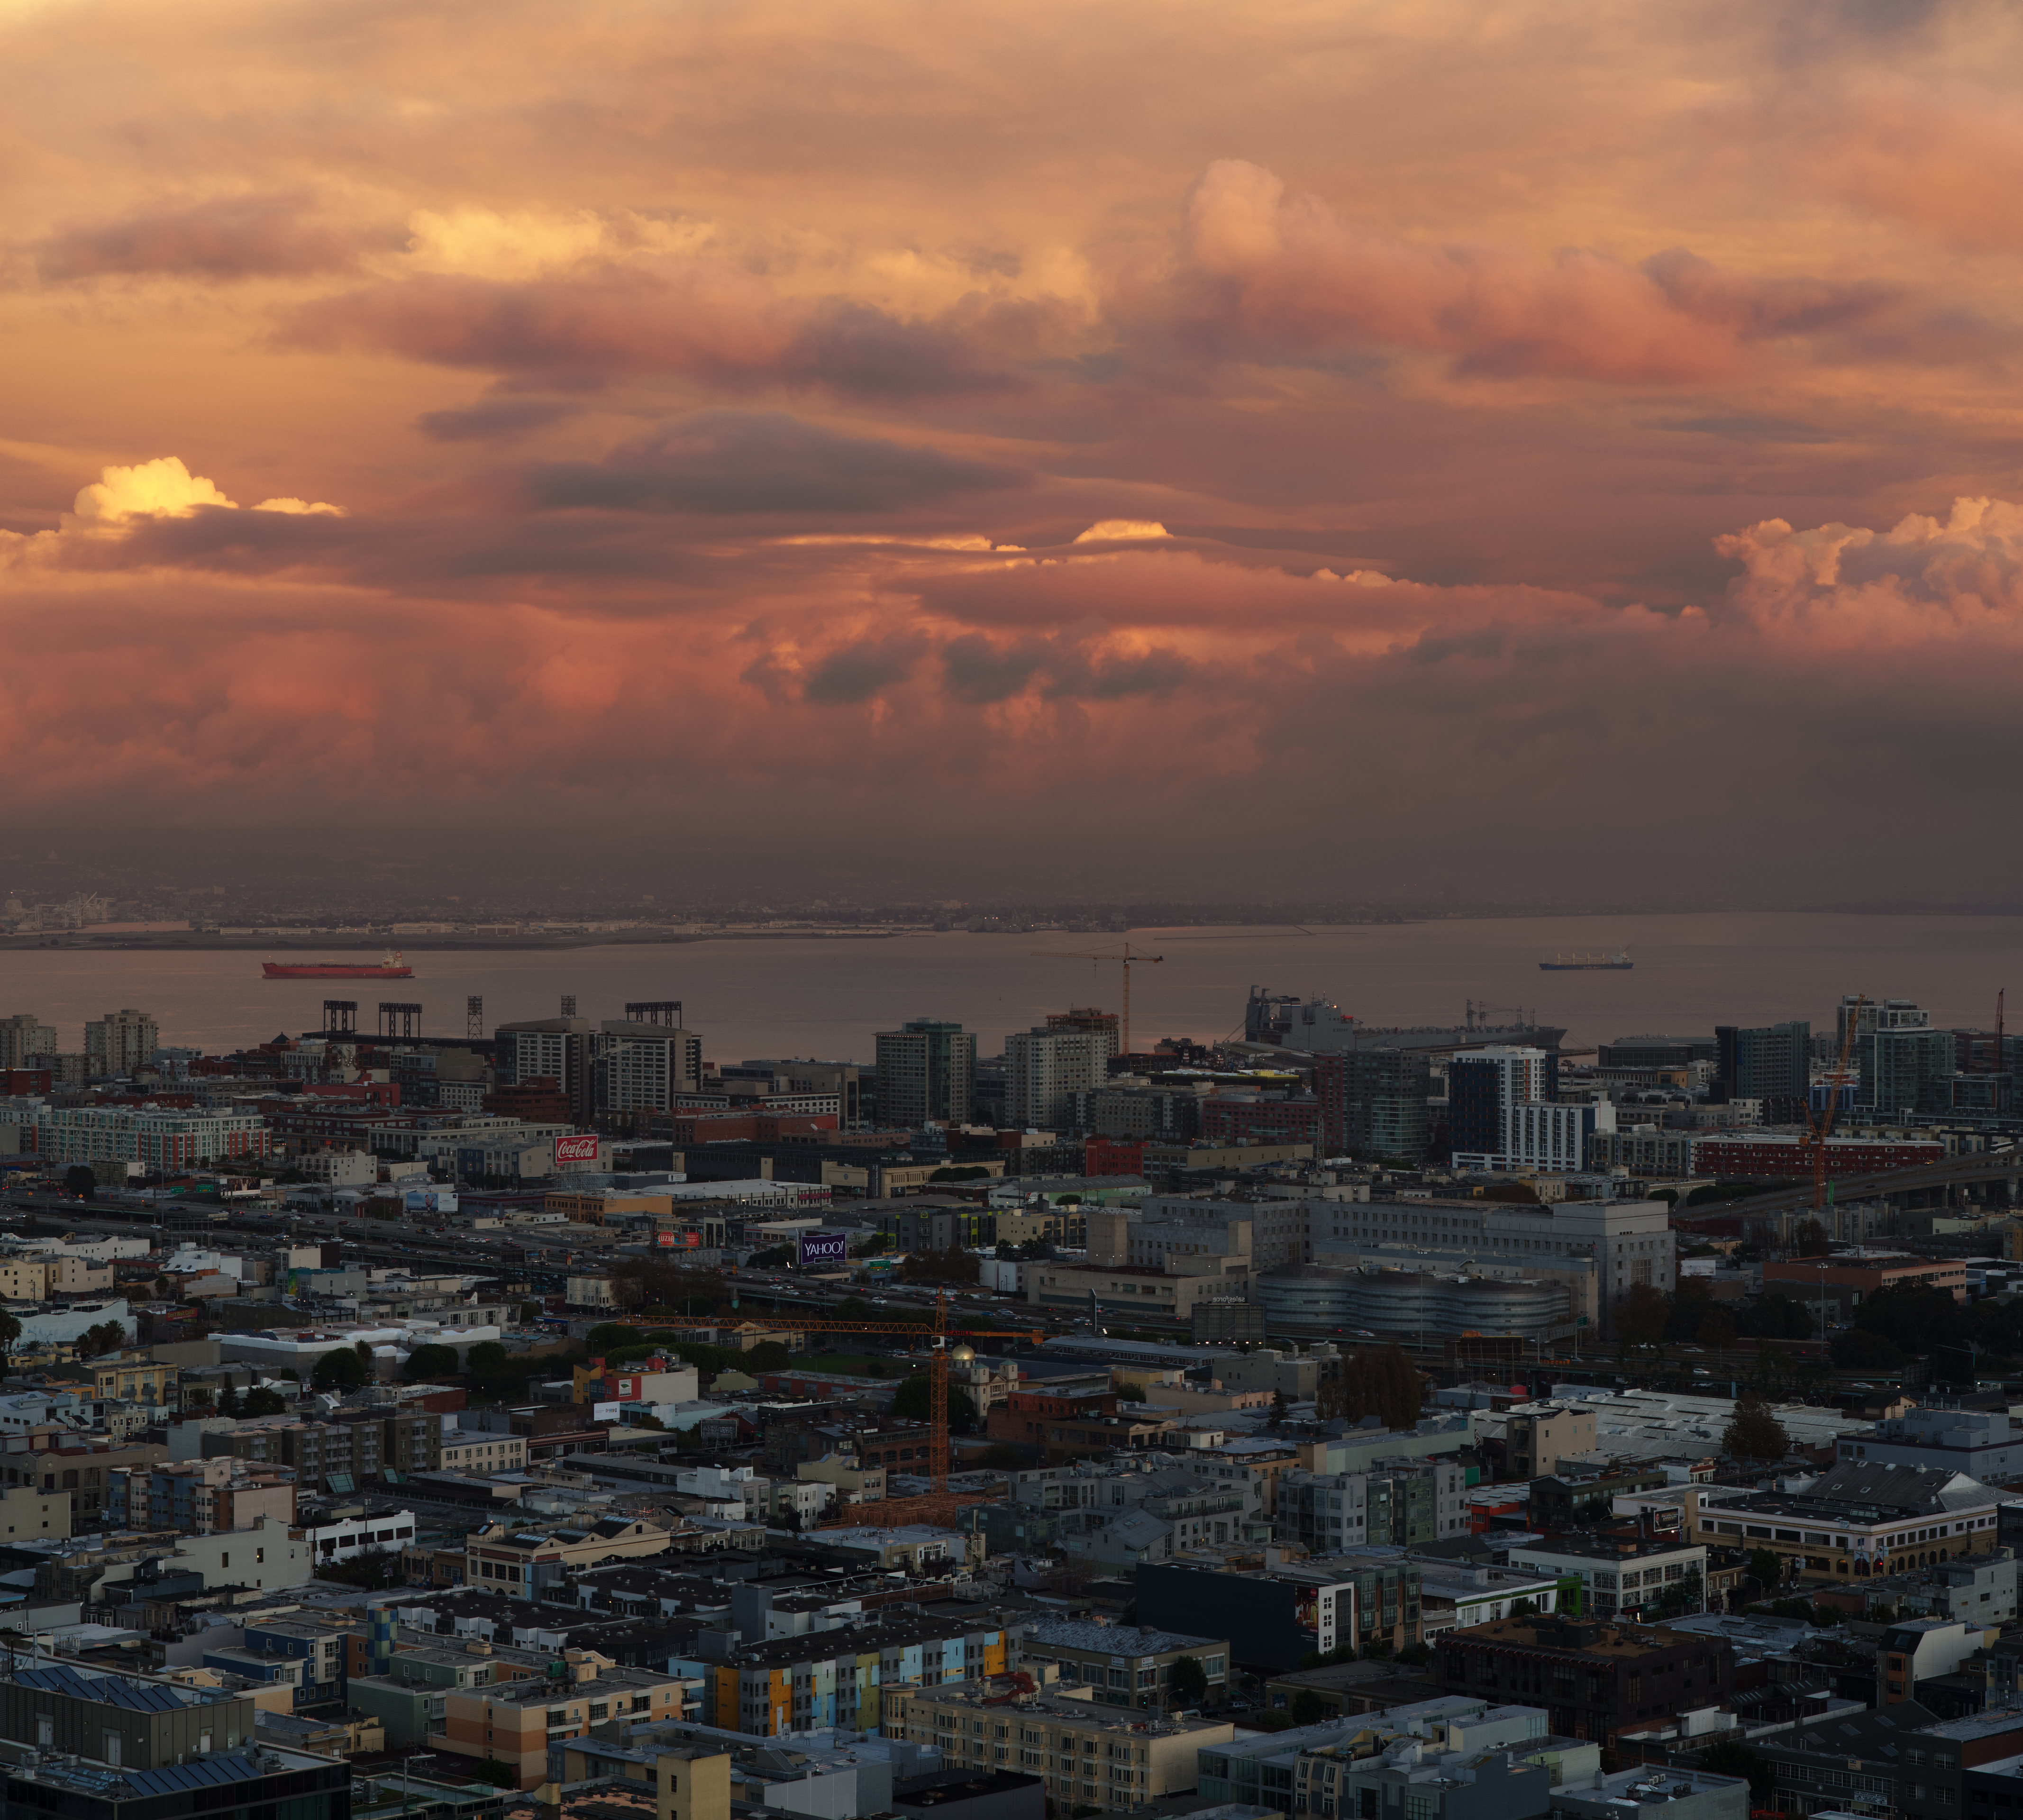 Sunset over SOMA as seen from 100 Van Ness Avenue